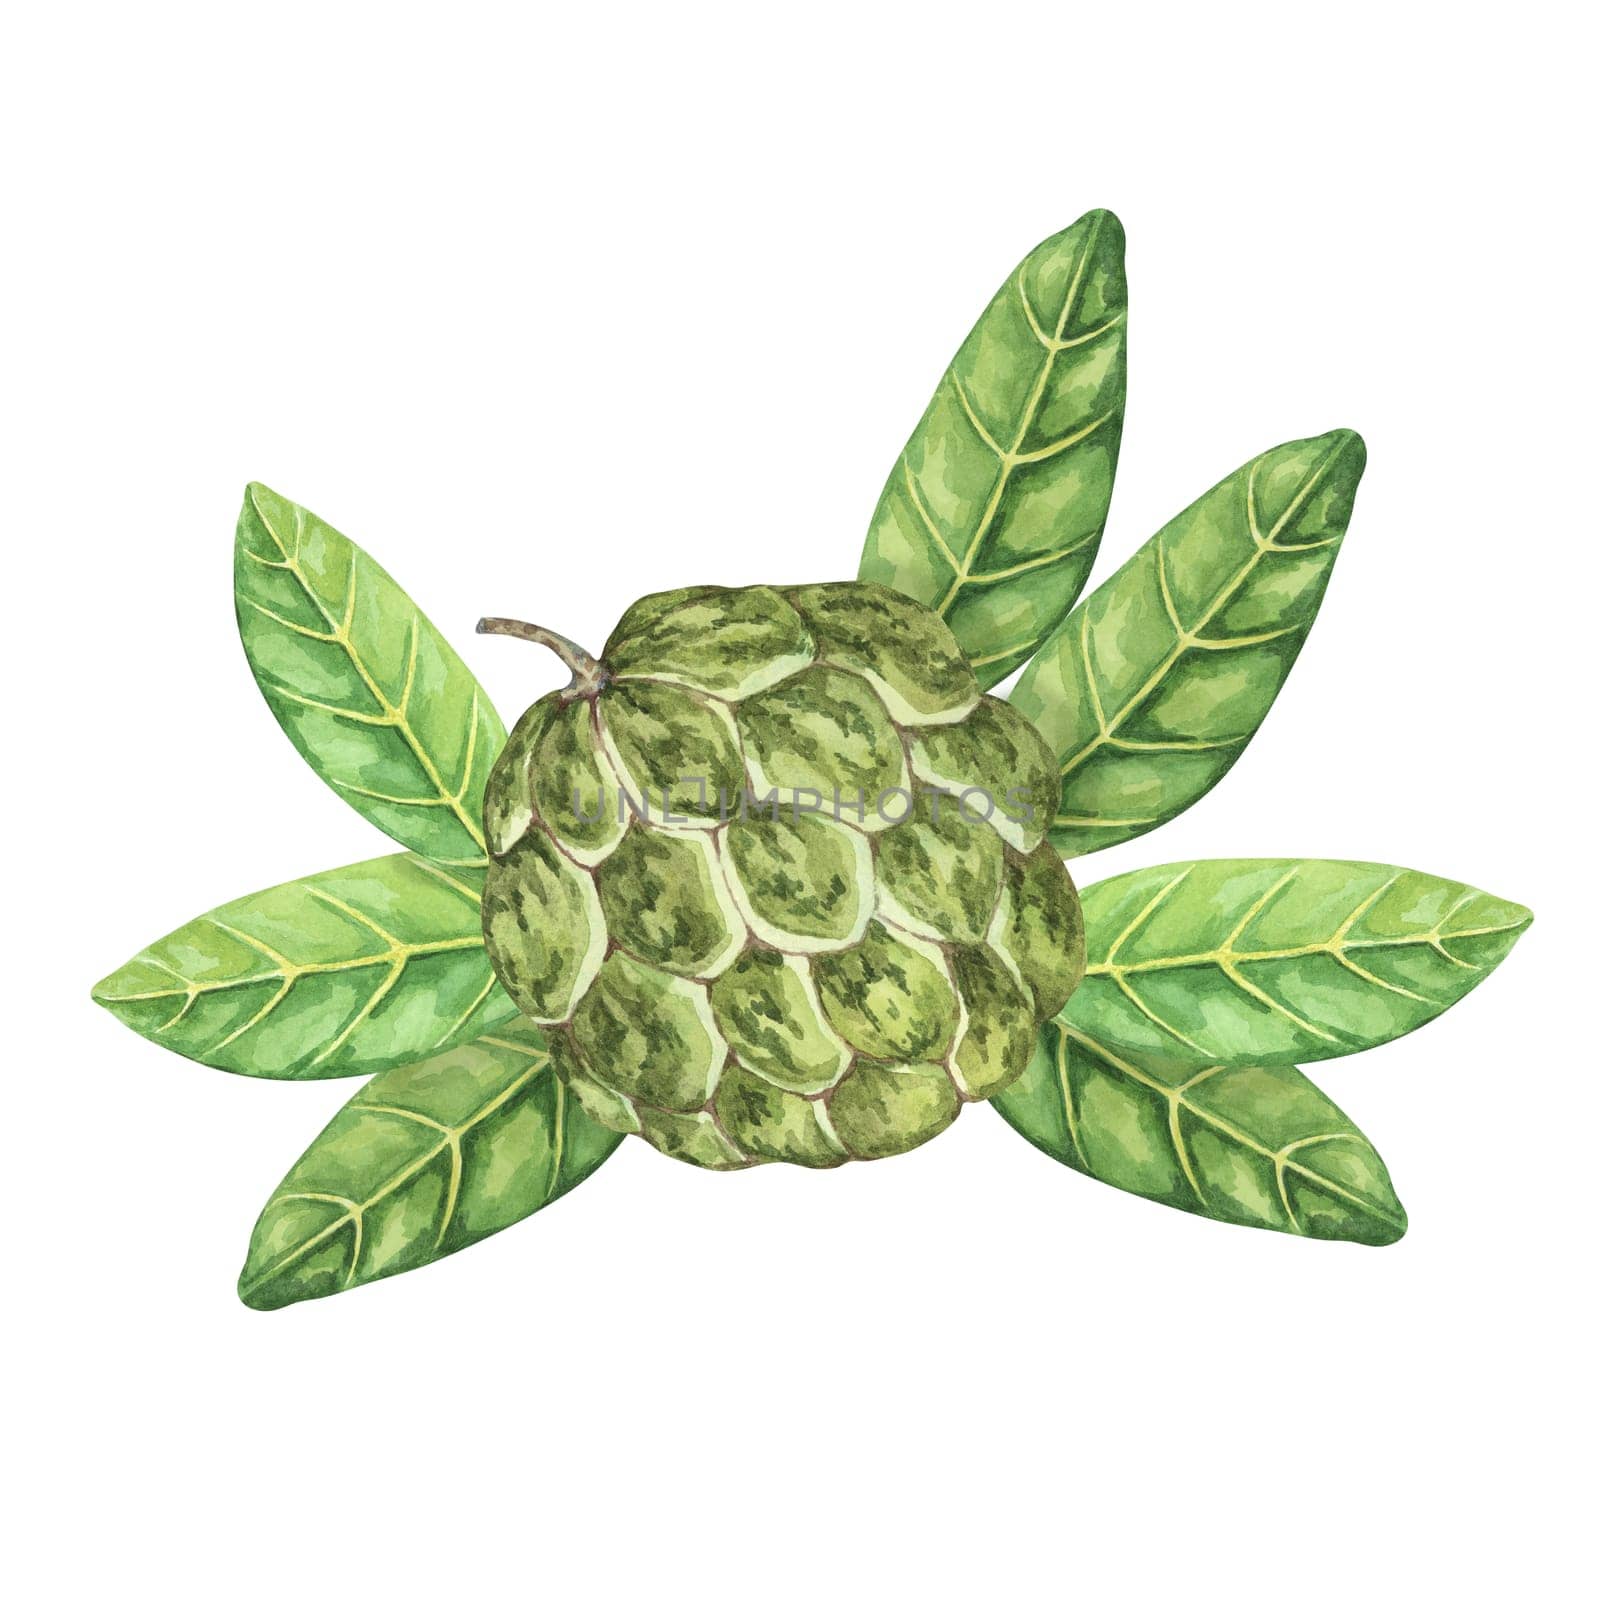 Green cherimoya exotic fruit with leaves. Hand drawn watercolor illustration of custard apple, sugar sweet apple set for printing, packaging, stickers by Fofito